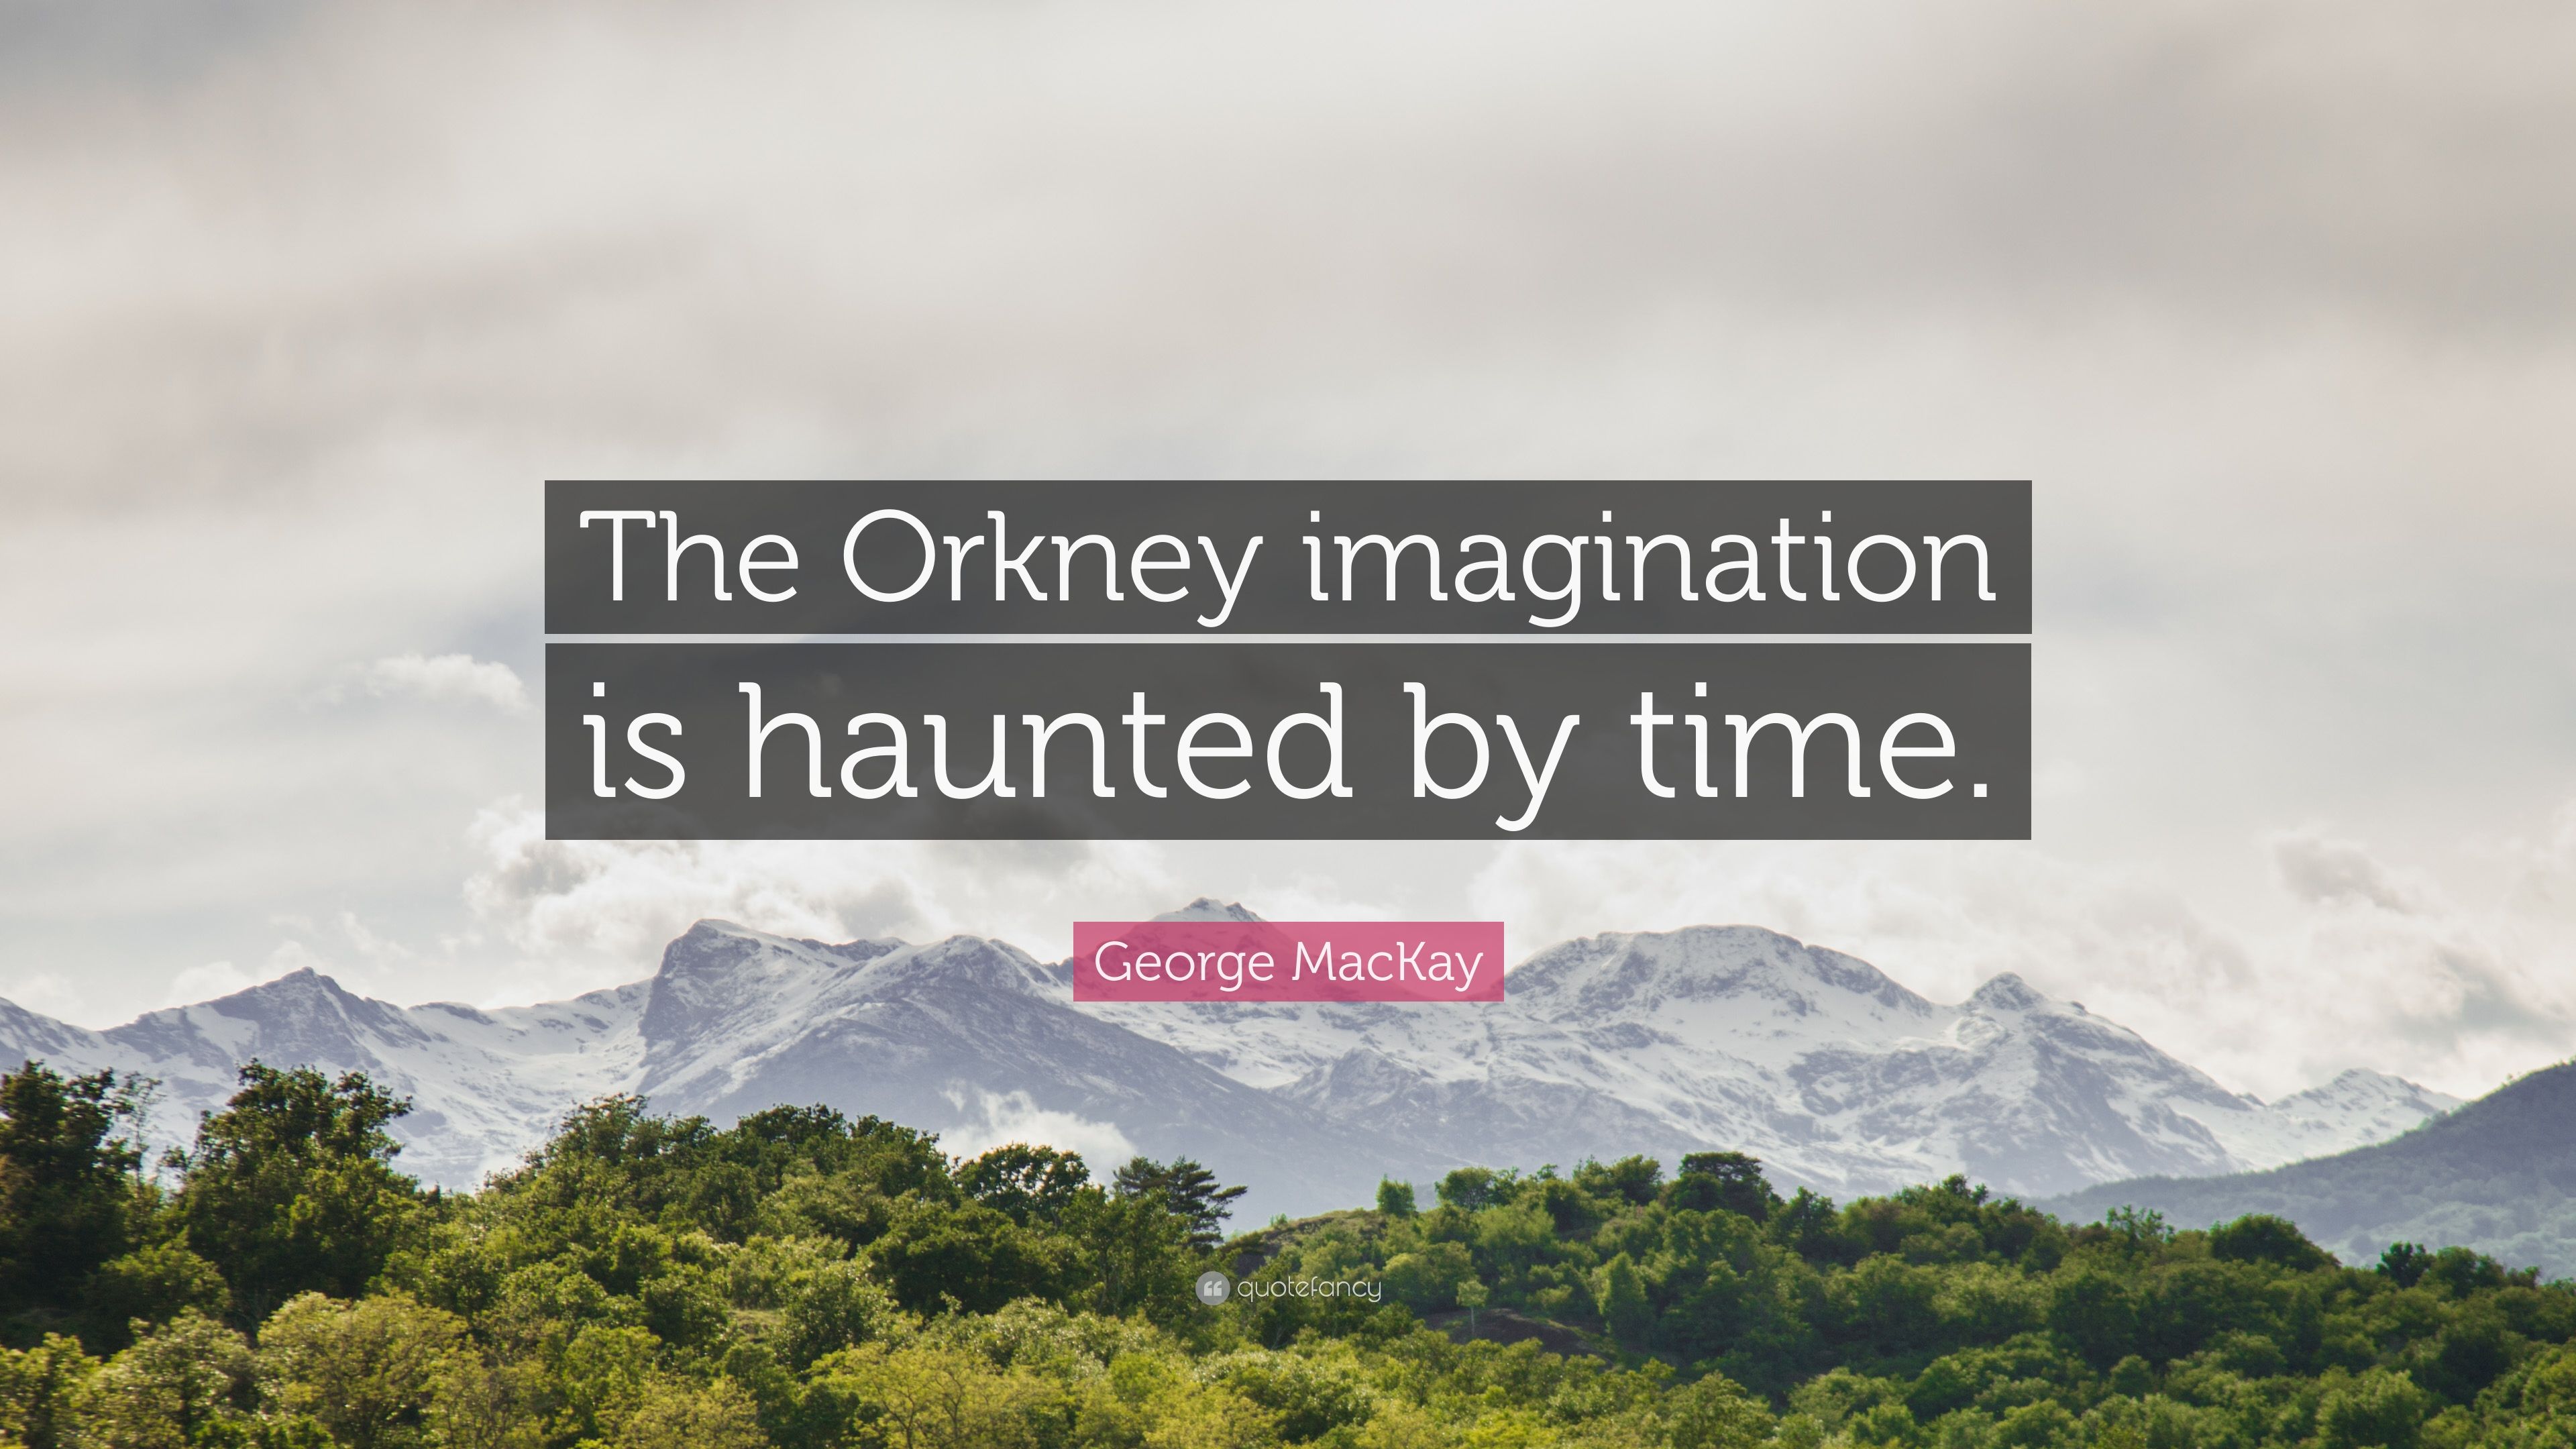 George MacKay Quote: “The Orkney imagination is haunted